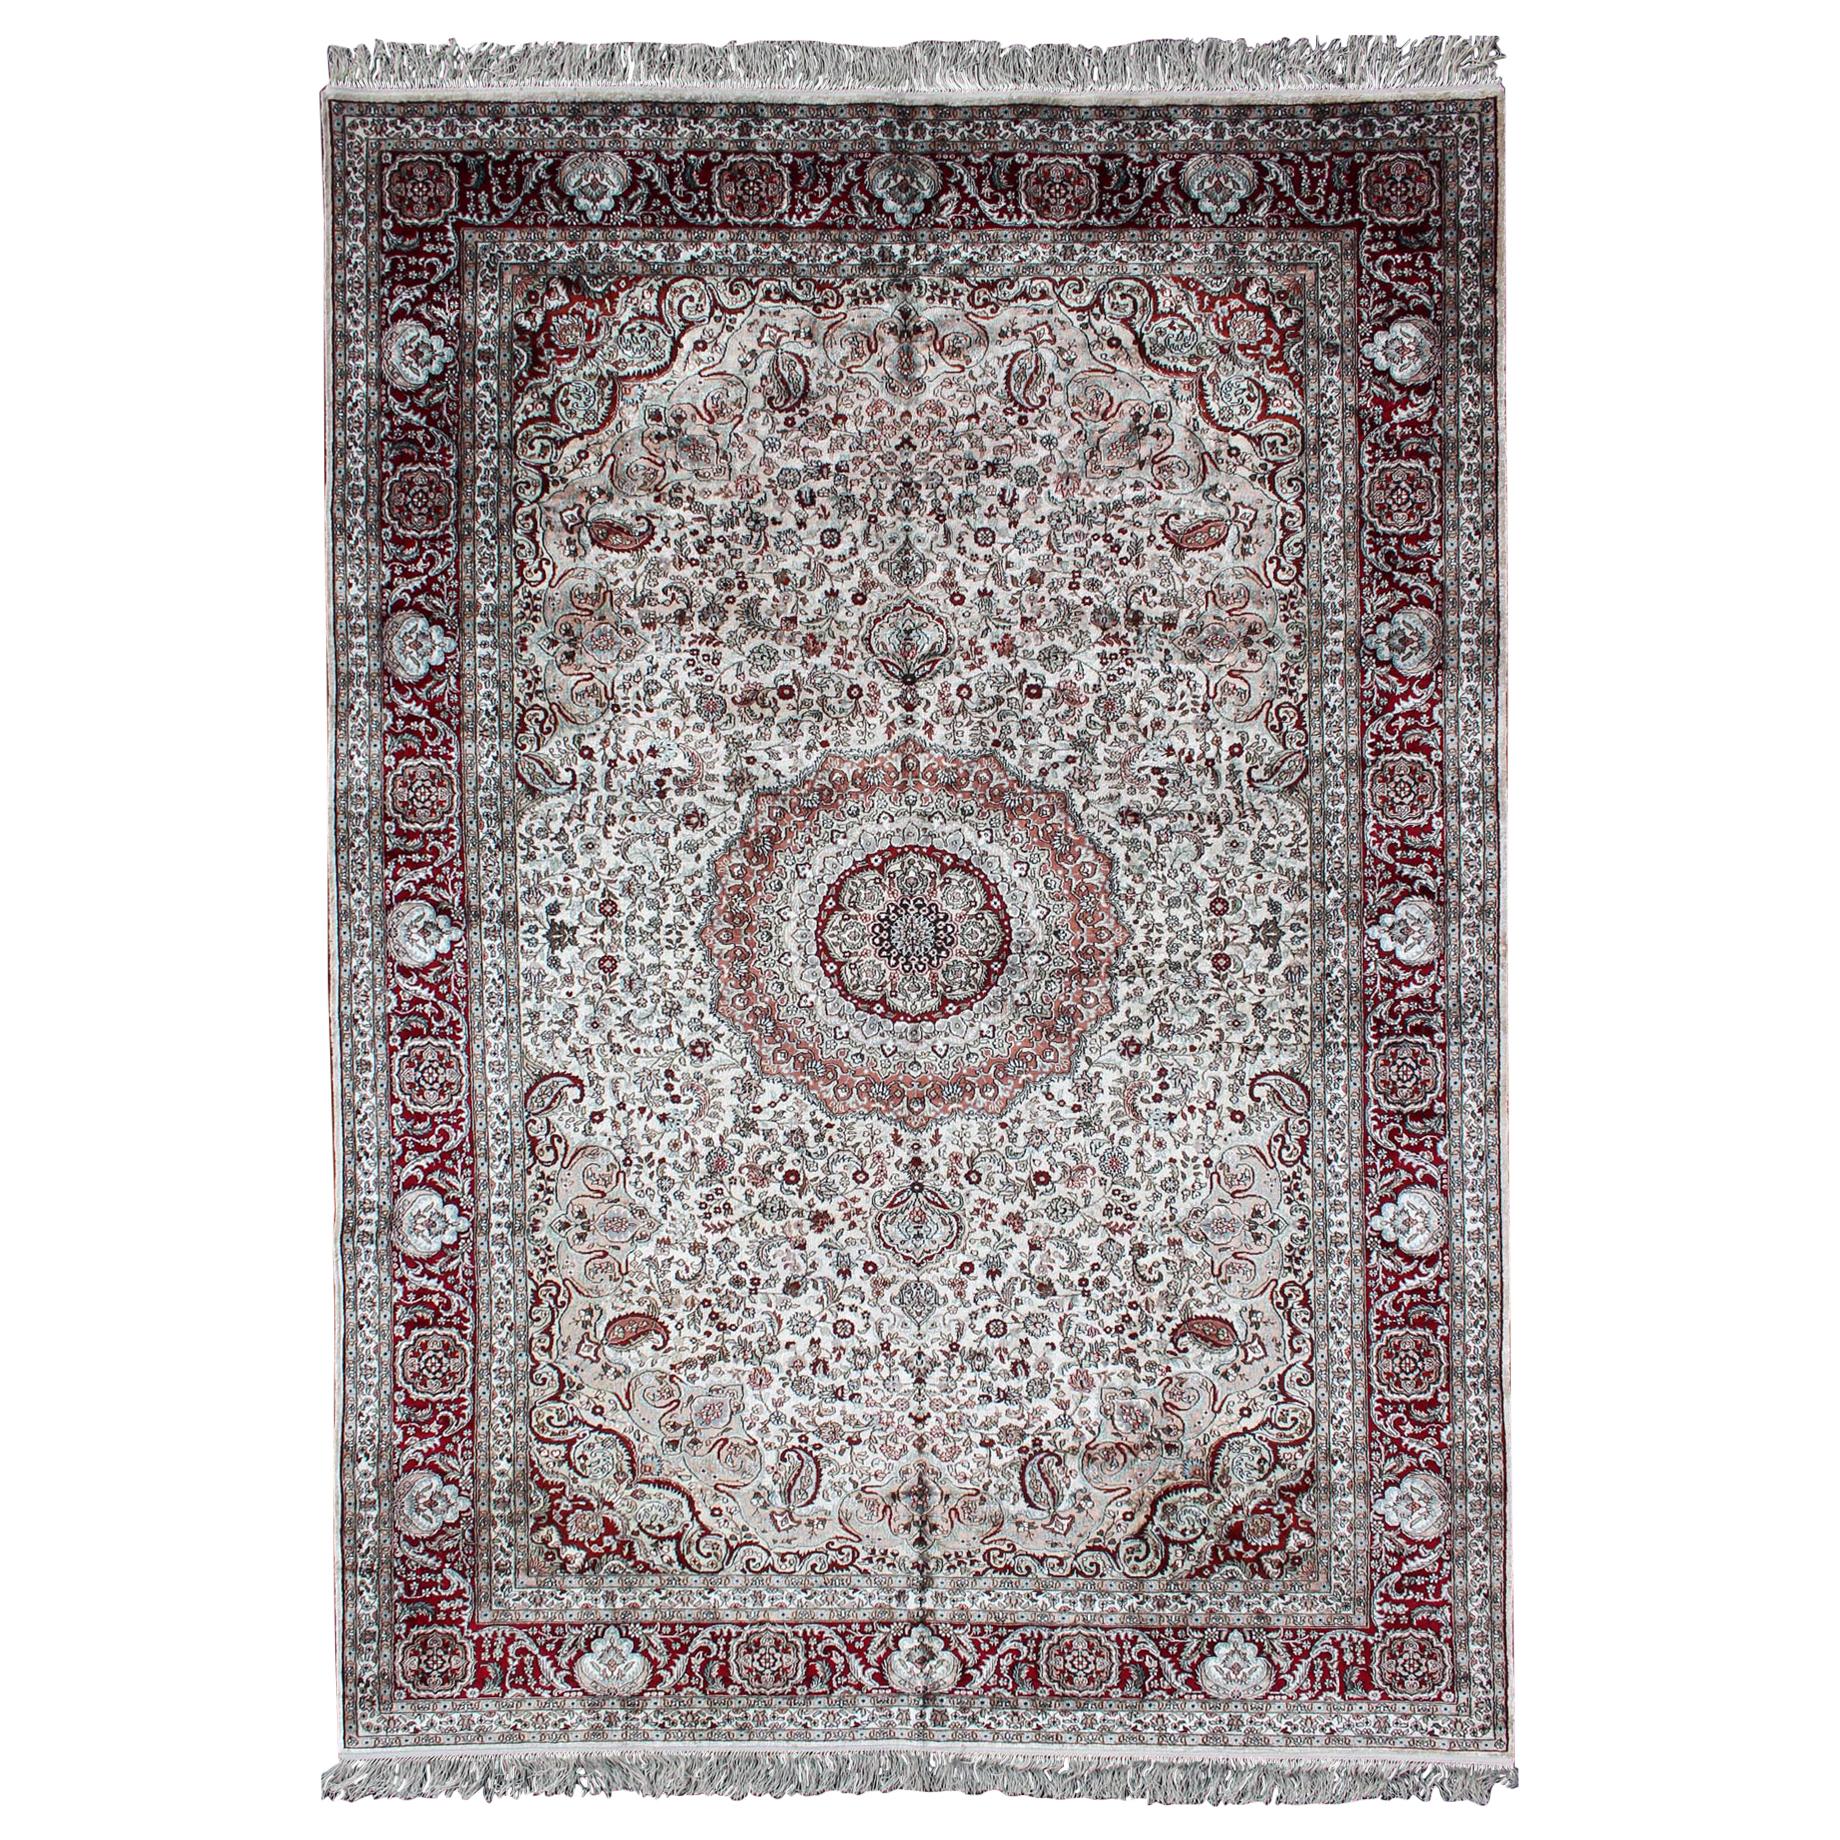 Silk Vintage Isfahan Design Medallion Carpet with Intricate Floral Elements